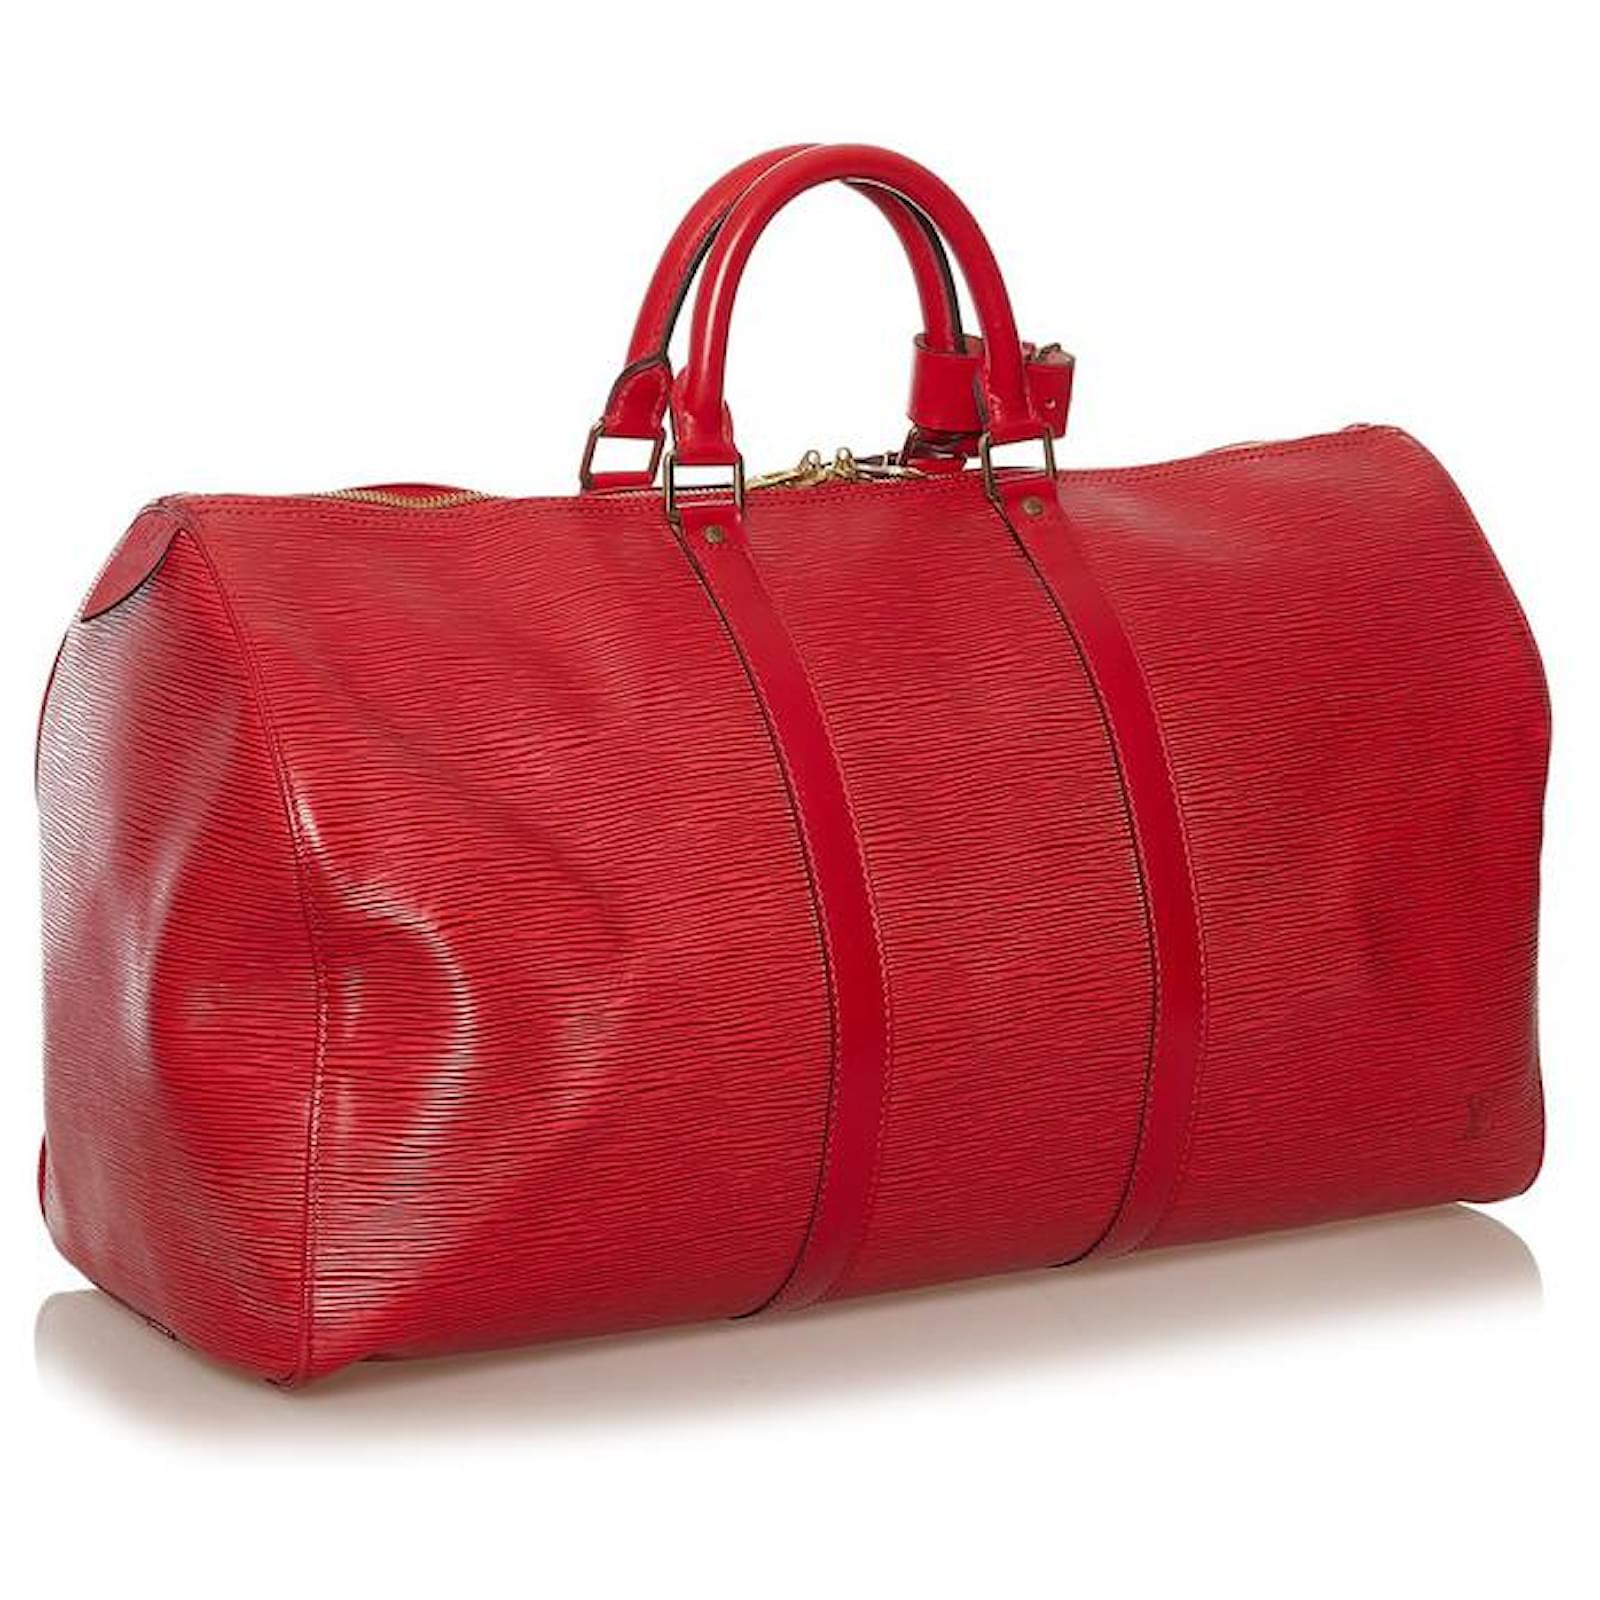 Louis Vuitton Epi Keepall 50 - Red Luggage and Travel, Handbags